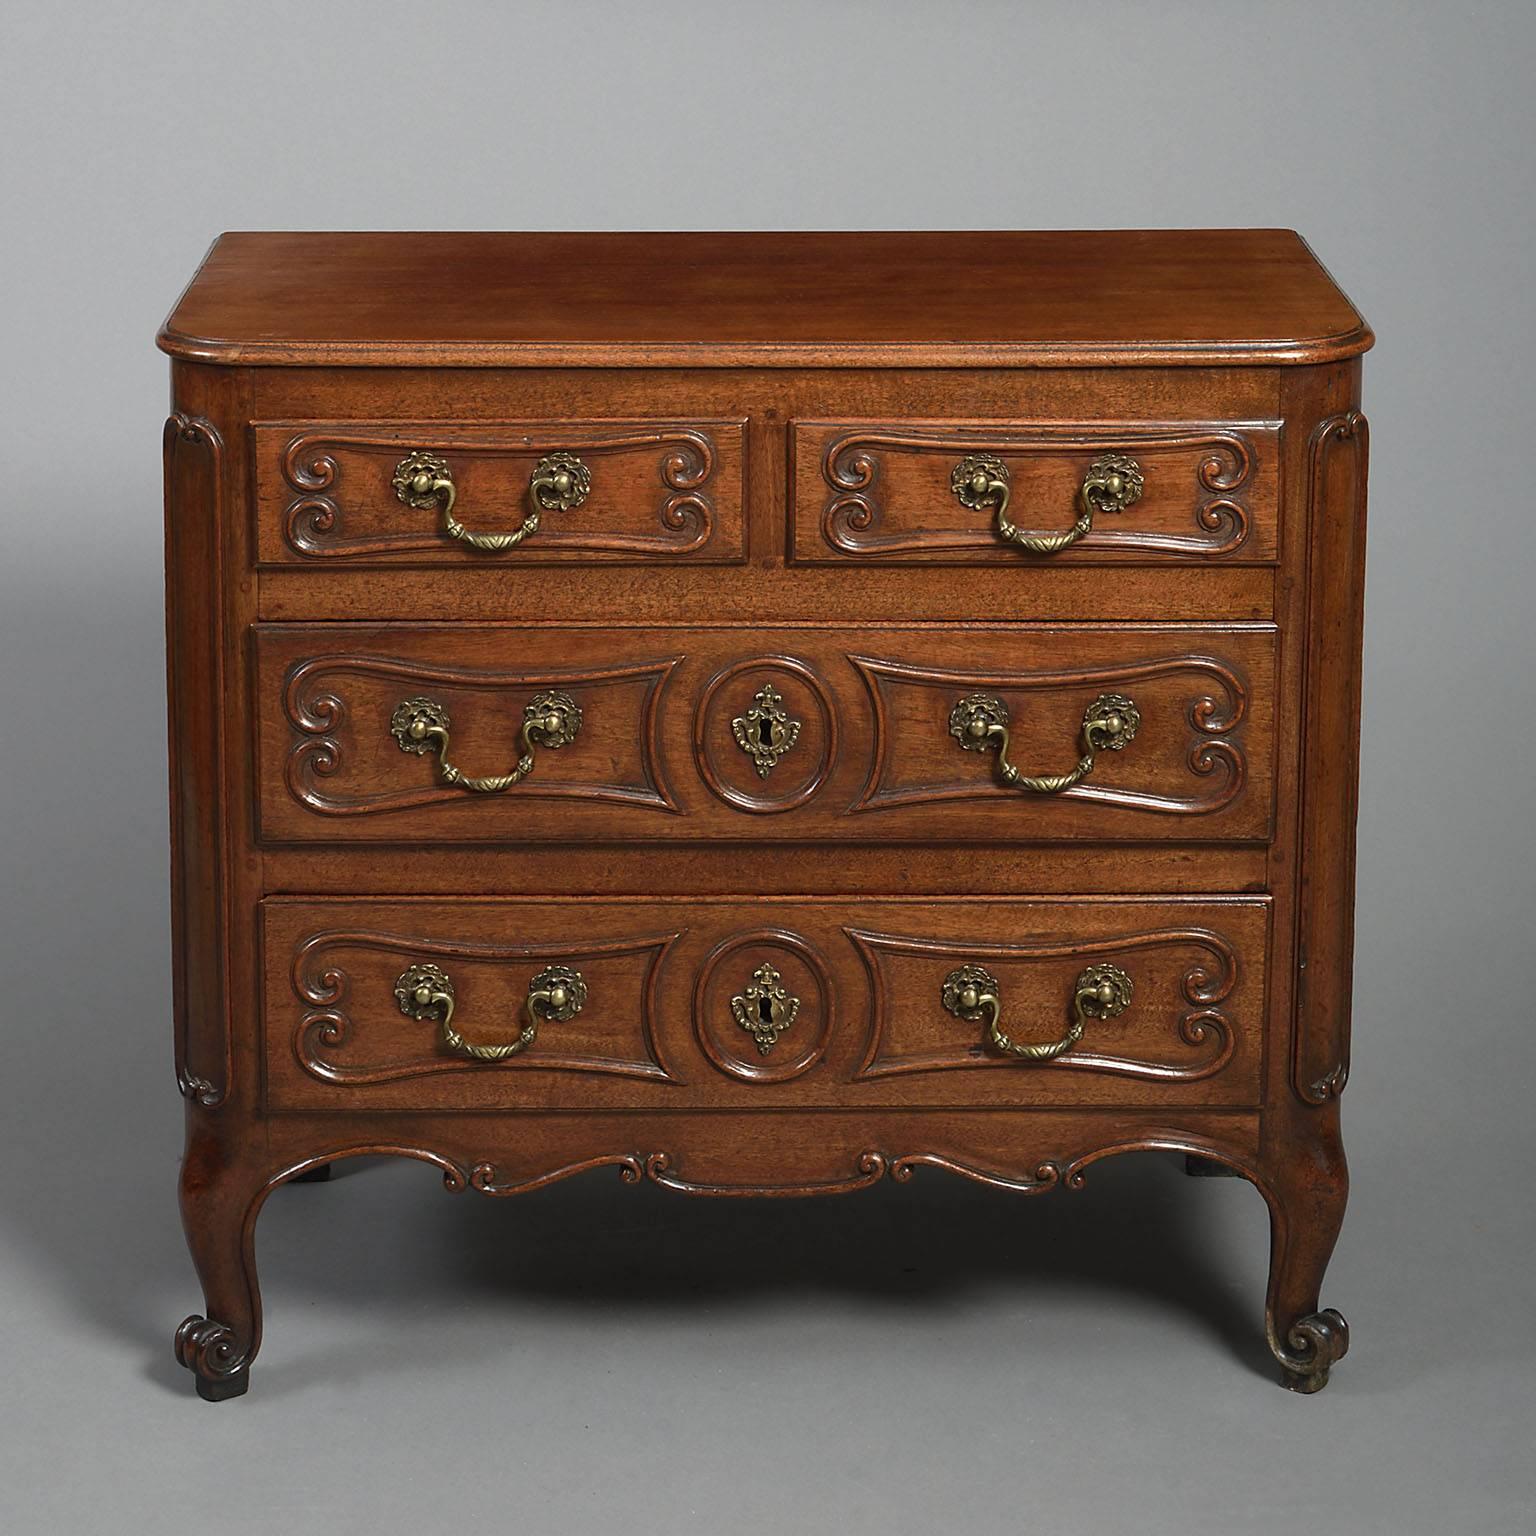 Small 18th century Louis XV Provincial walnut commode

The two short above two long drawers with shaped mouldings and with panelled sides raised on cabriole legs. Perfect dimensions for use at a bedside,
circa 1750.
Origin: France.

Measures: